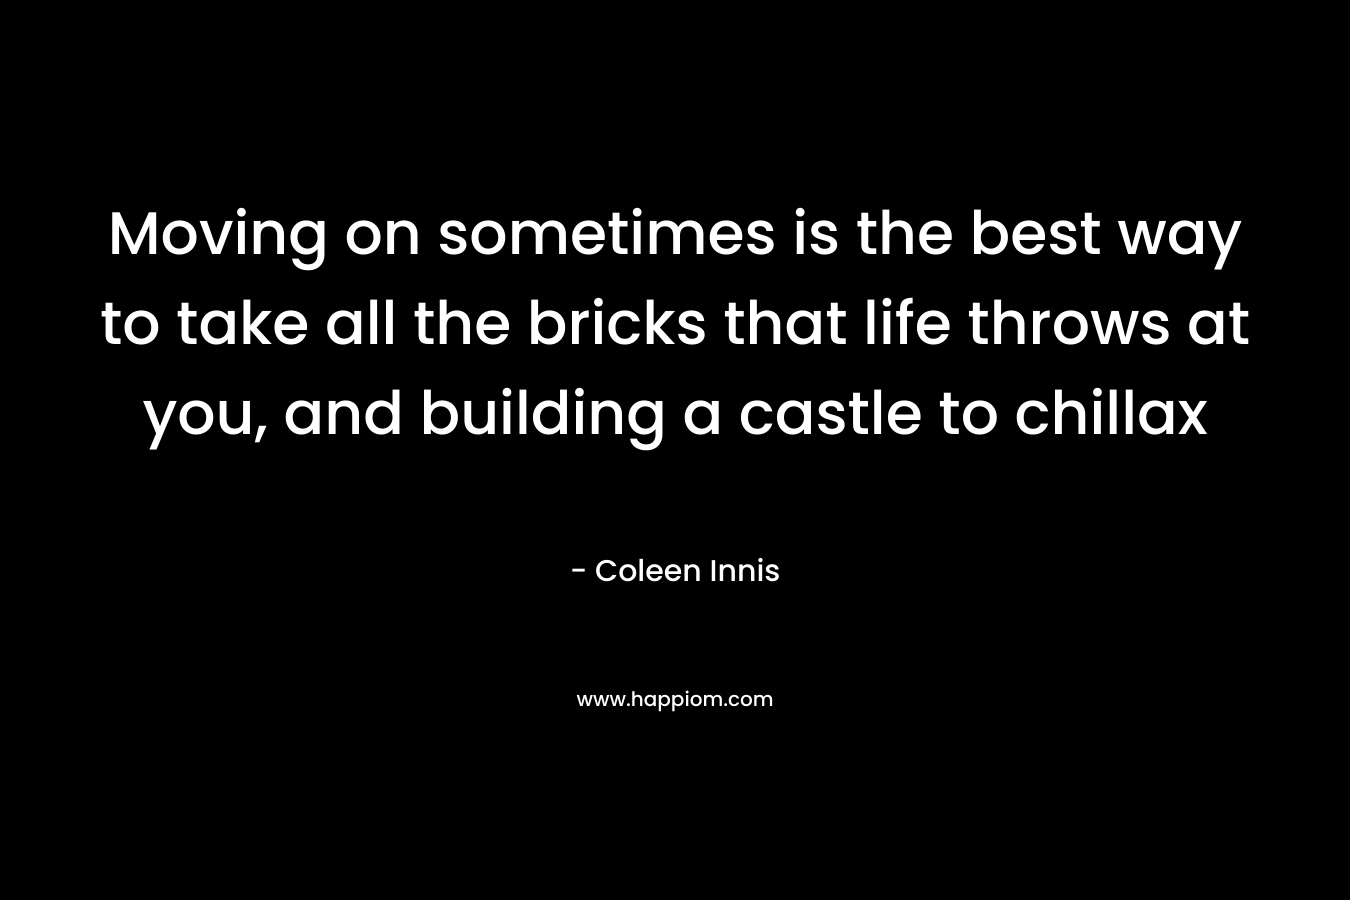 Moving on sometimes is the best way to take all the bricks that life throws at you, and building a castle to chillax – Coleen Innis